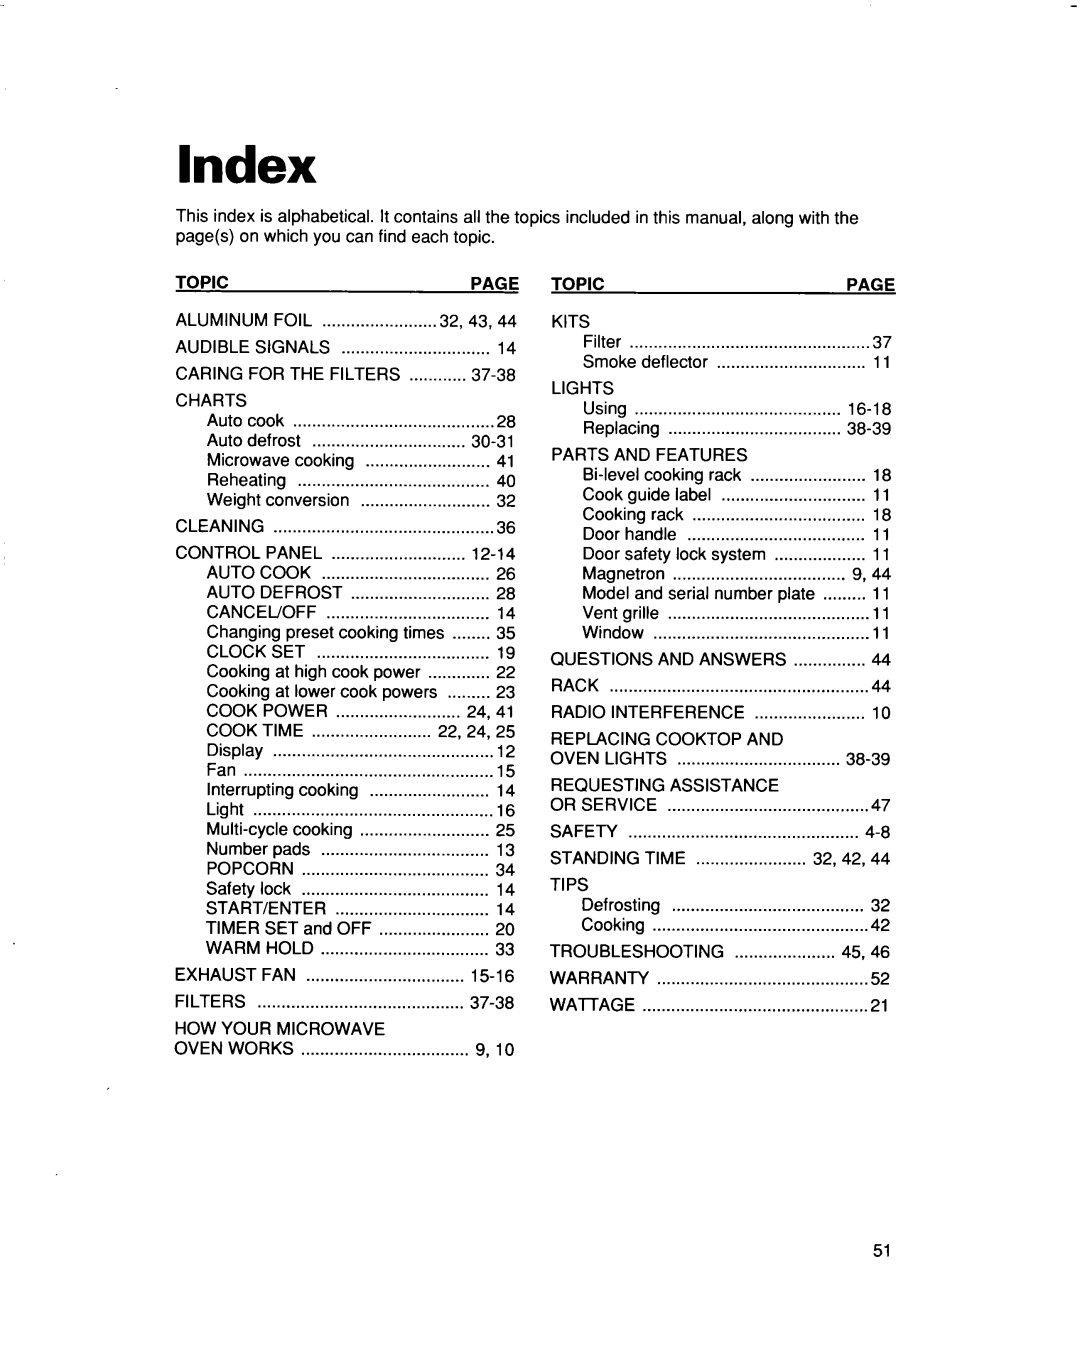 Whirlpool MHEI IRD warranty Index, Topic, Page 